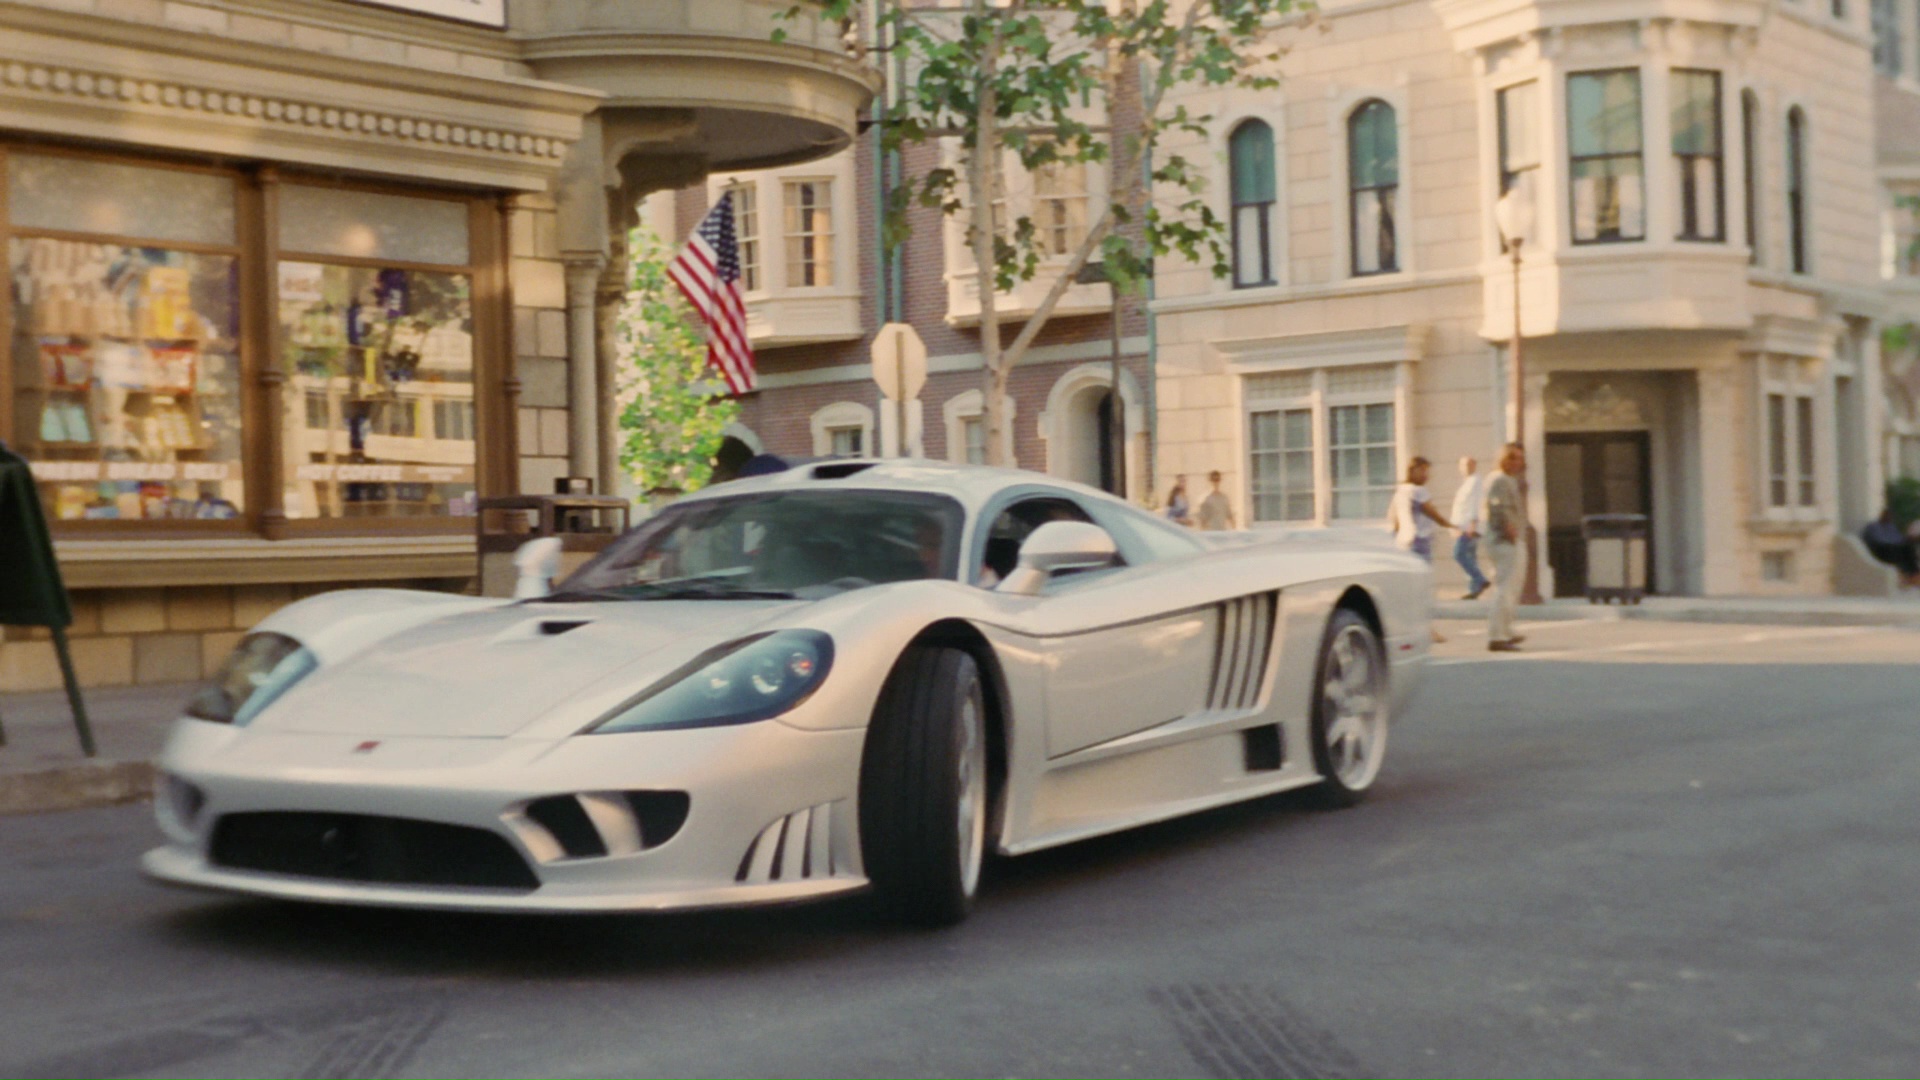 Saleen S7 American Hand-Built, High-Performance Supercar Used by Jim Carrey in Bruce ...